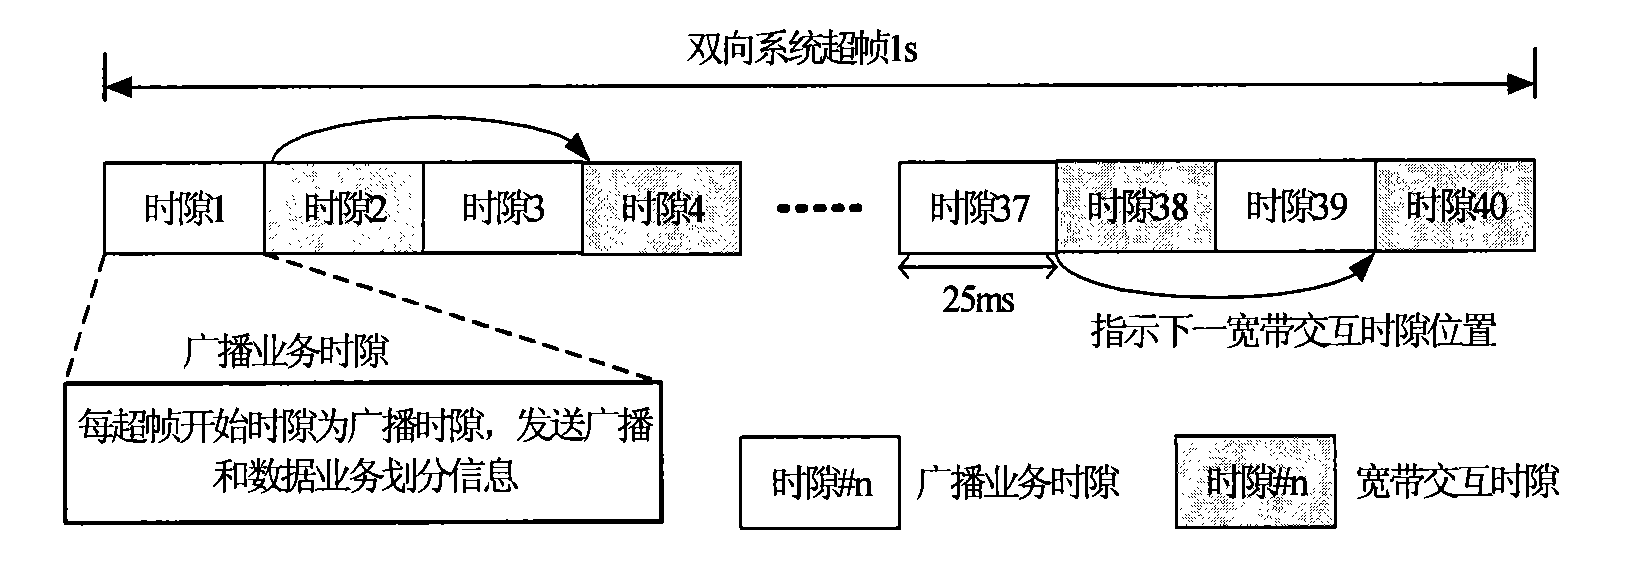 Method for smoothly upgrading digital terrestrial television broadcasting system to be of two-way